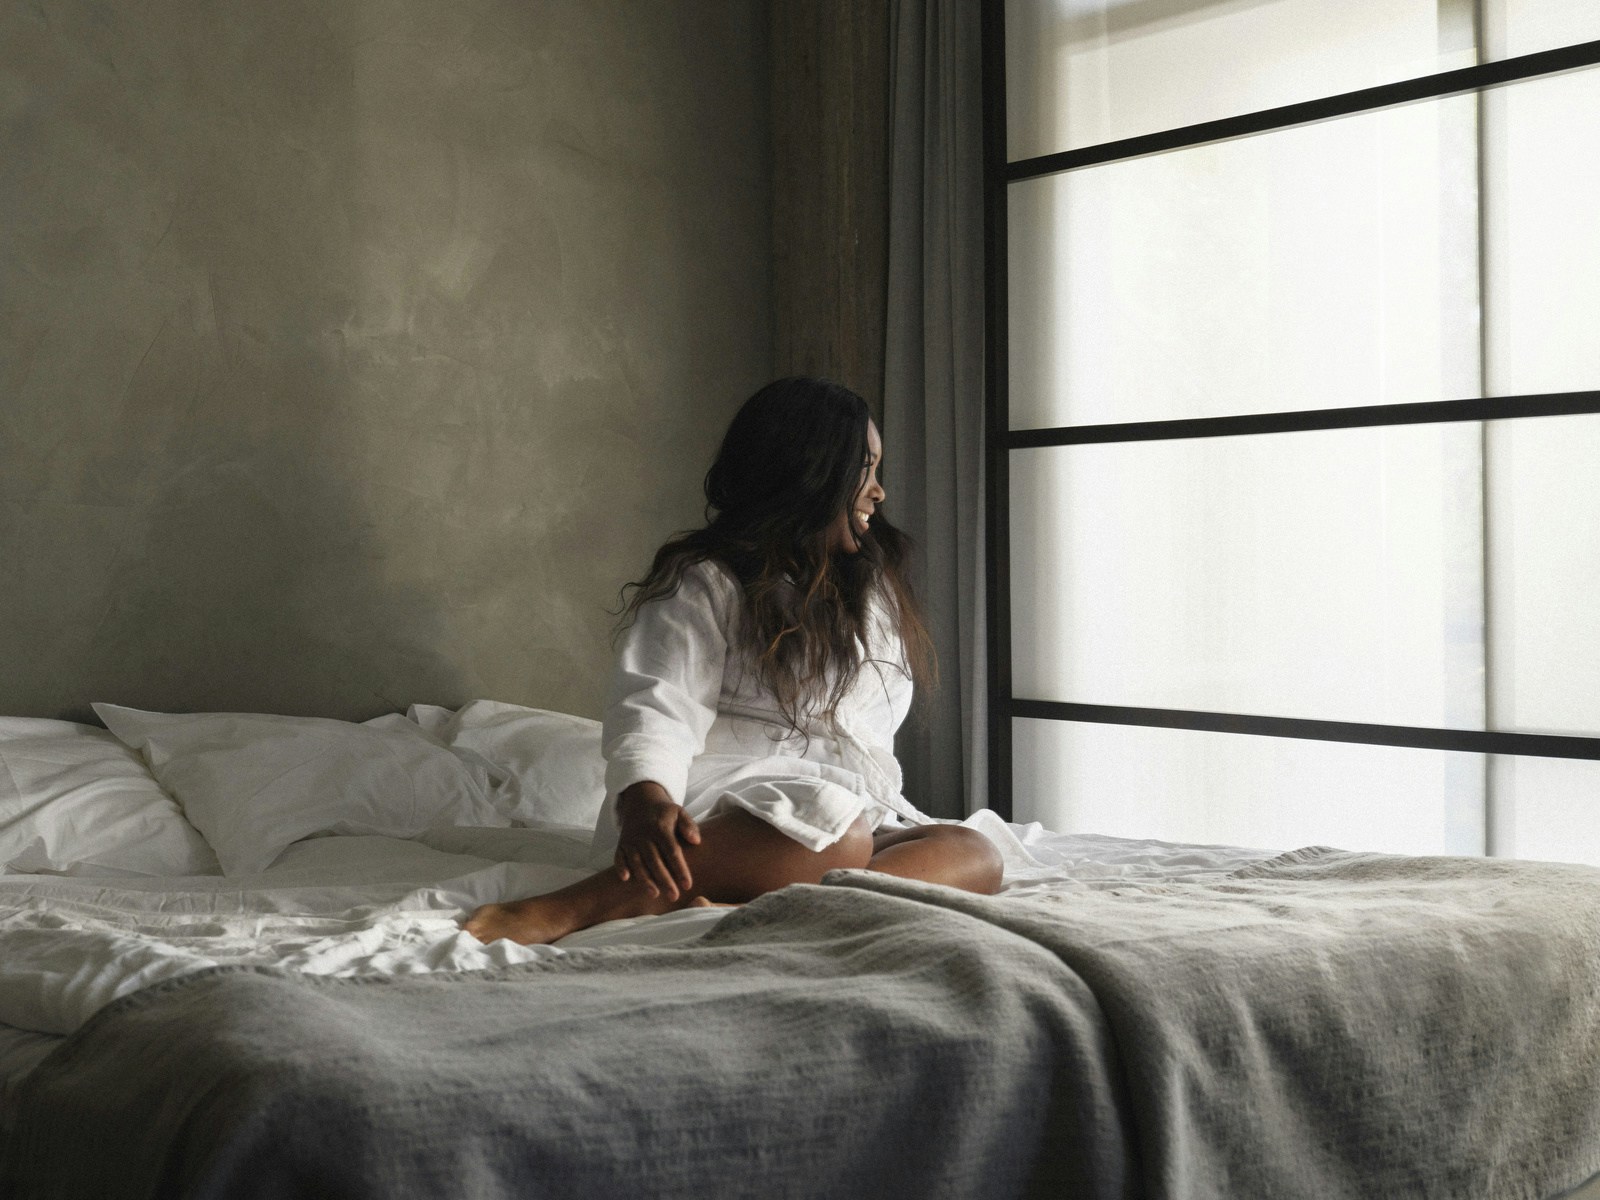 A woman sitting on a bed looking out the window